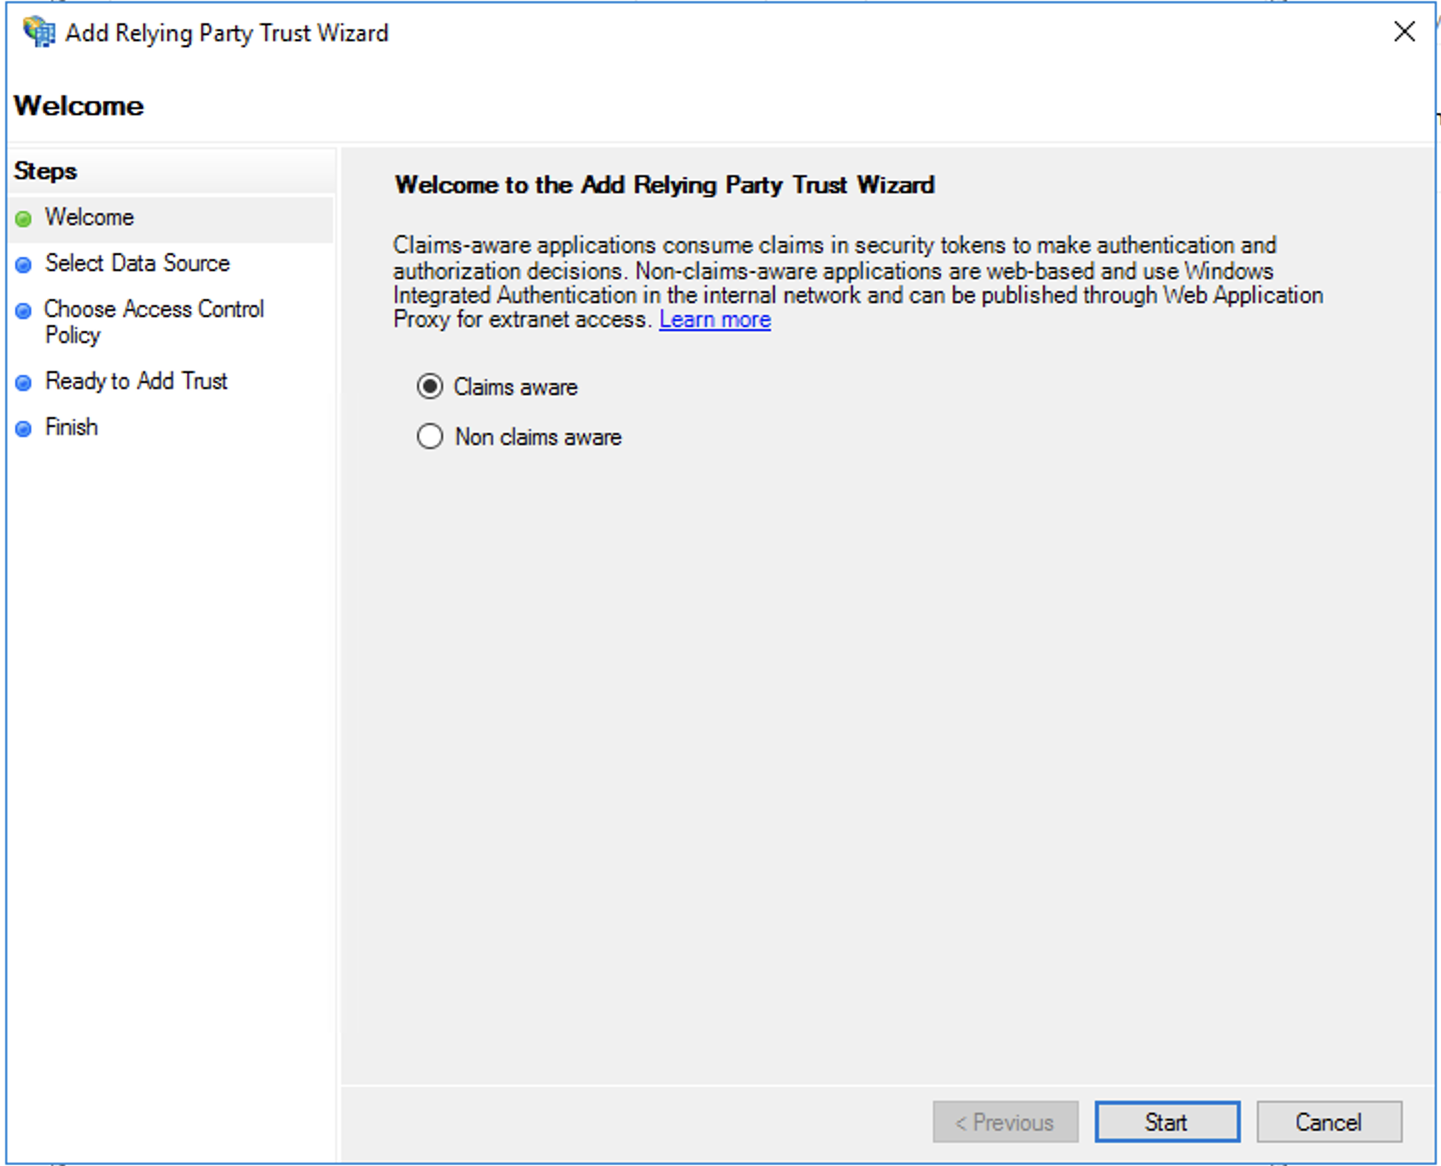 Add relying party trust wizard welcome screen. Select claims aware or non claims aware